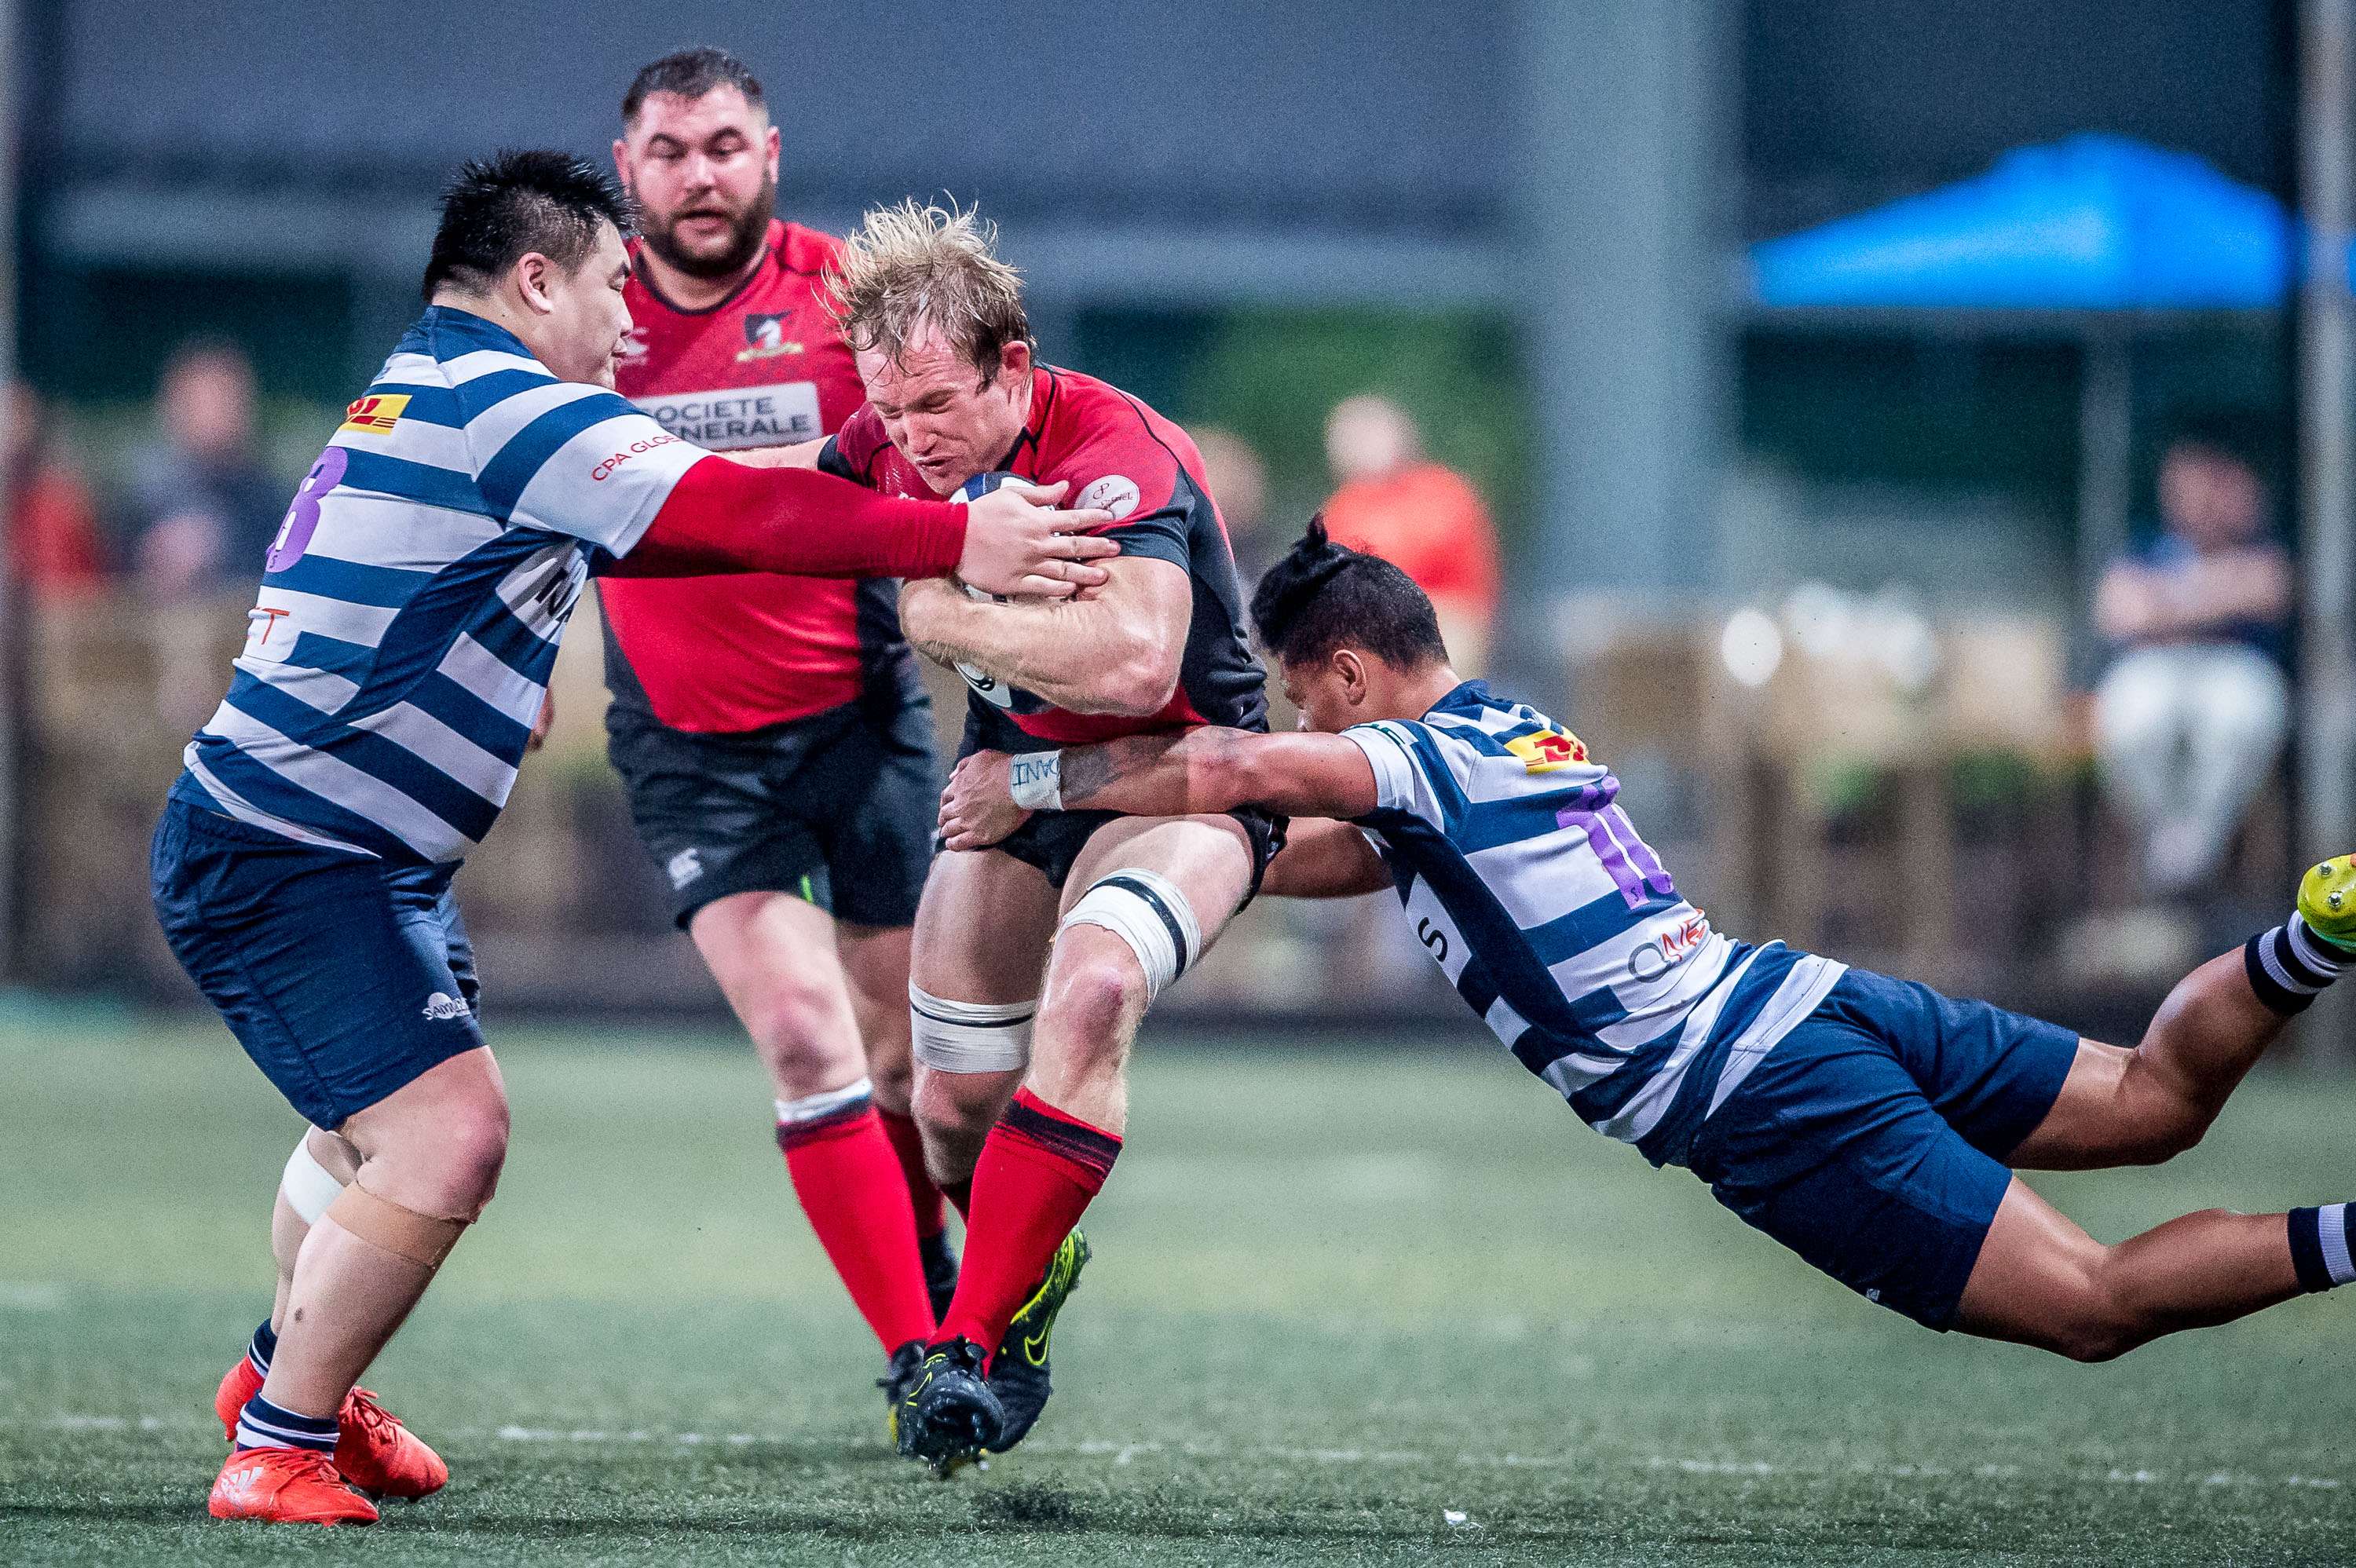 Toby Fenn takes on two HKFC tacklers during Valley’s impressive win in the Hong Kong Premiership on Saturday. Photos: HKRU